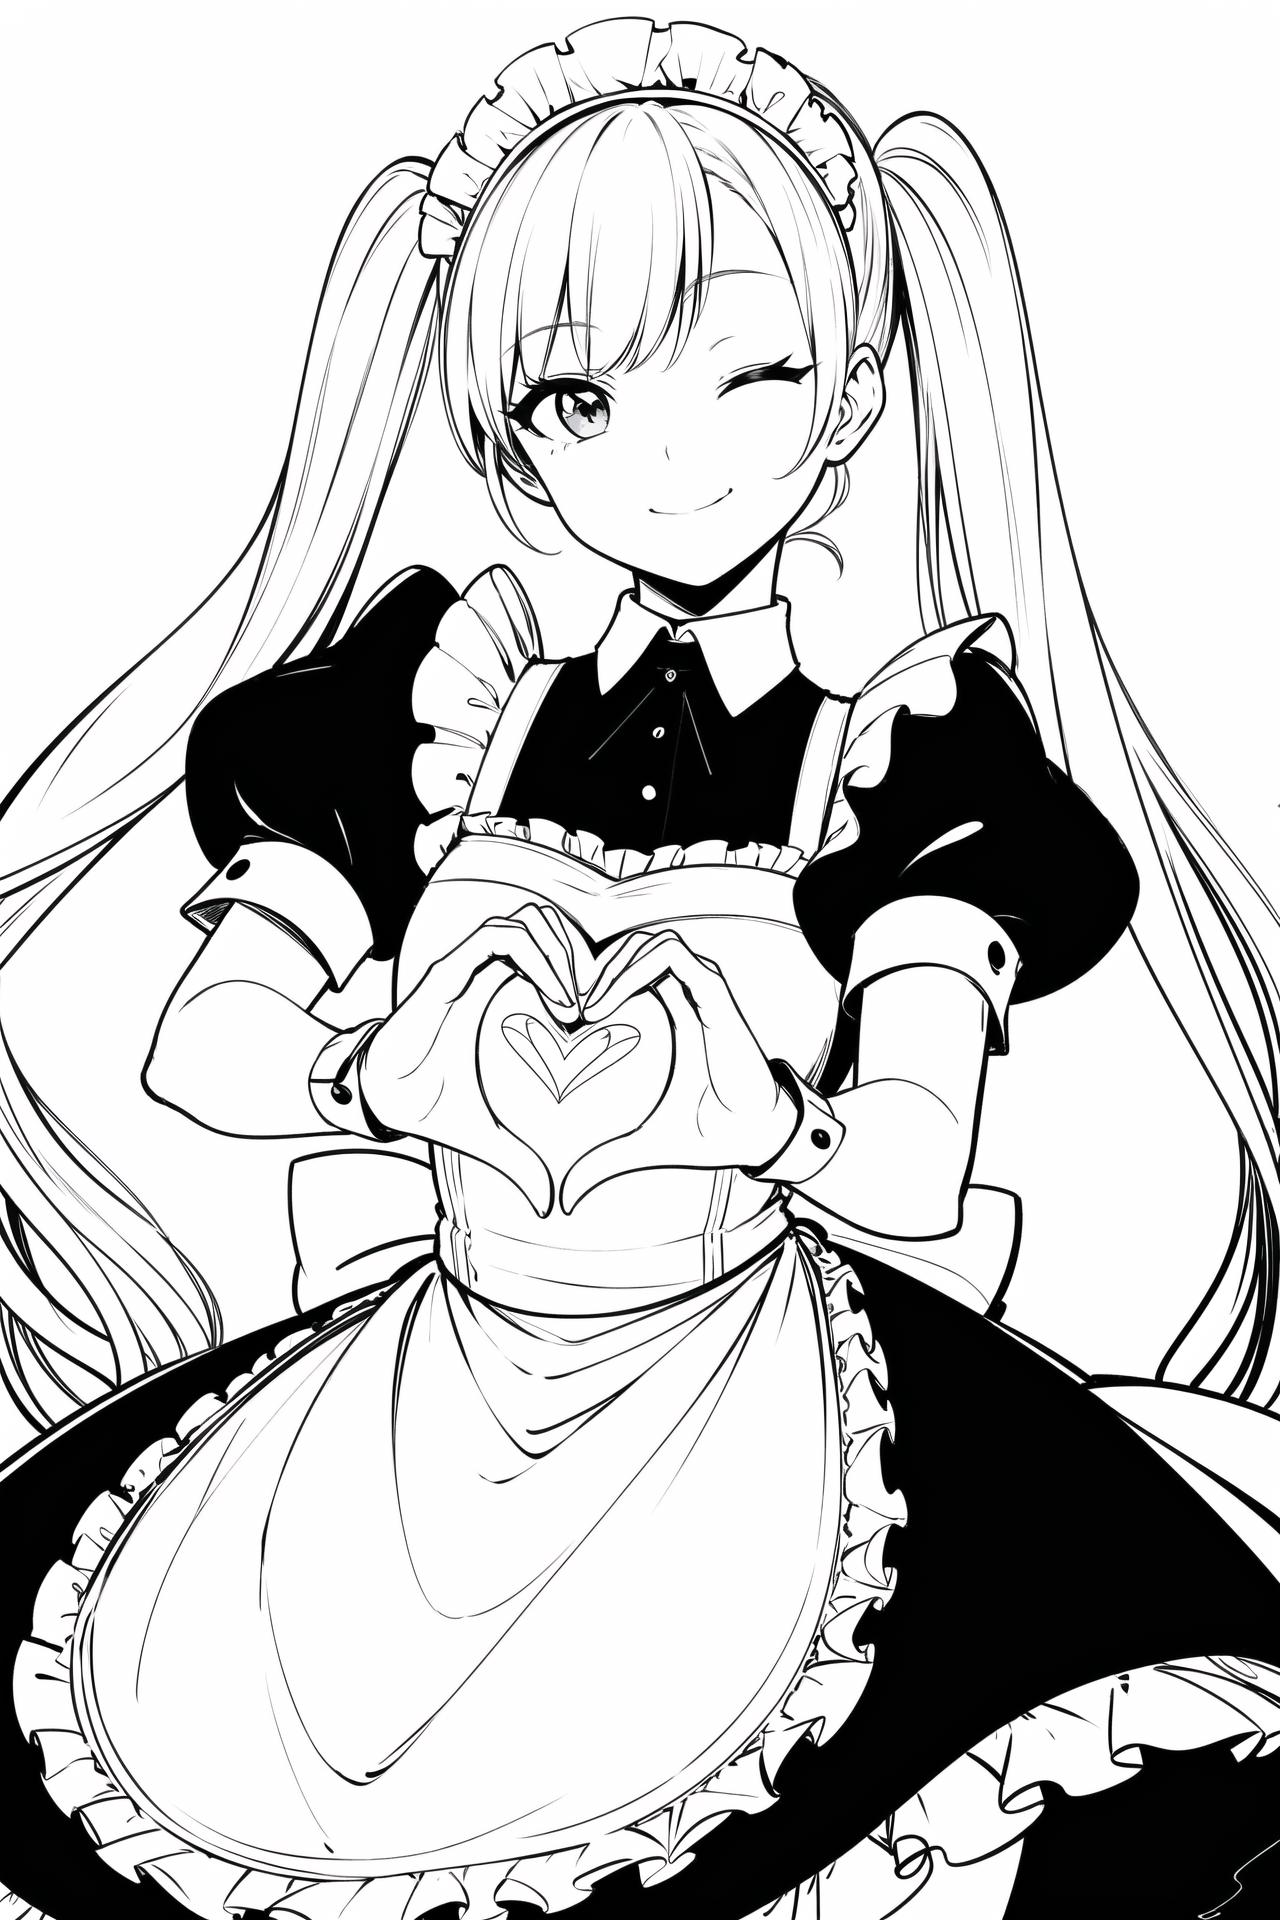 A smiling maid with a heart-shaped apron posing for the camera.